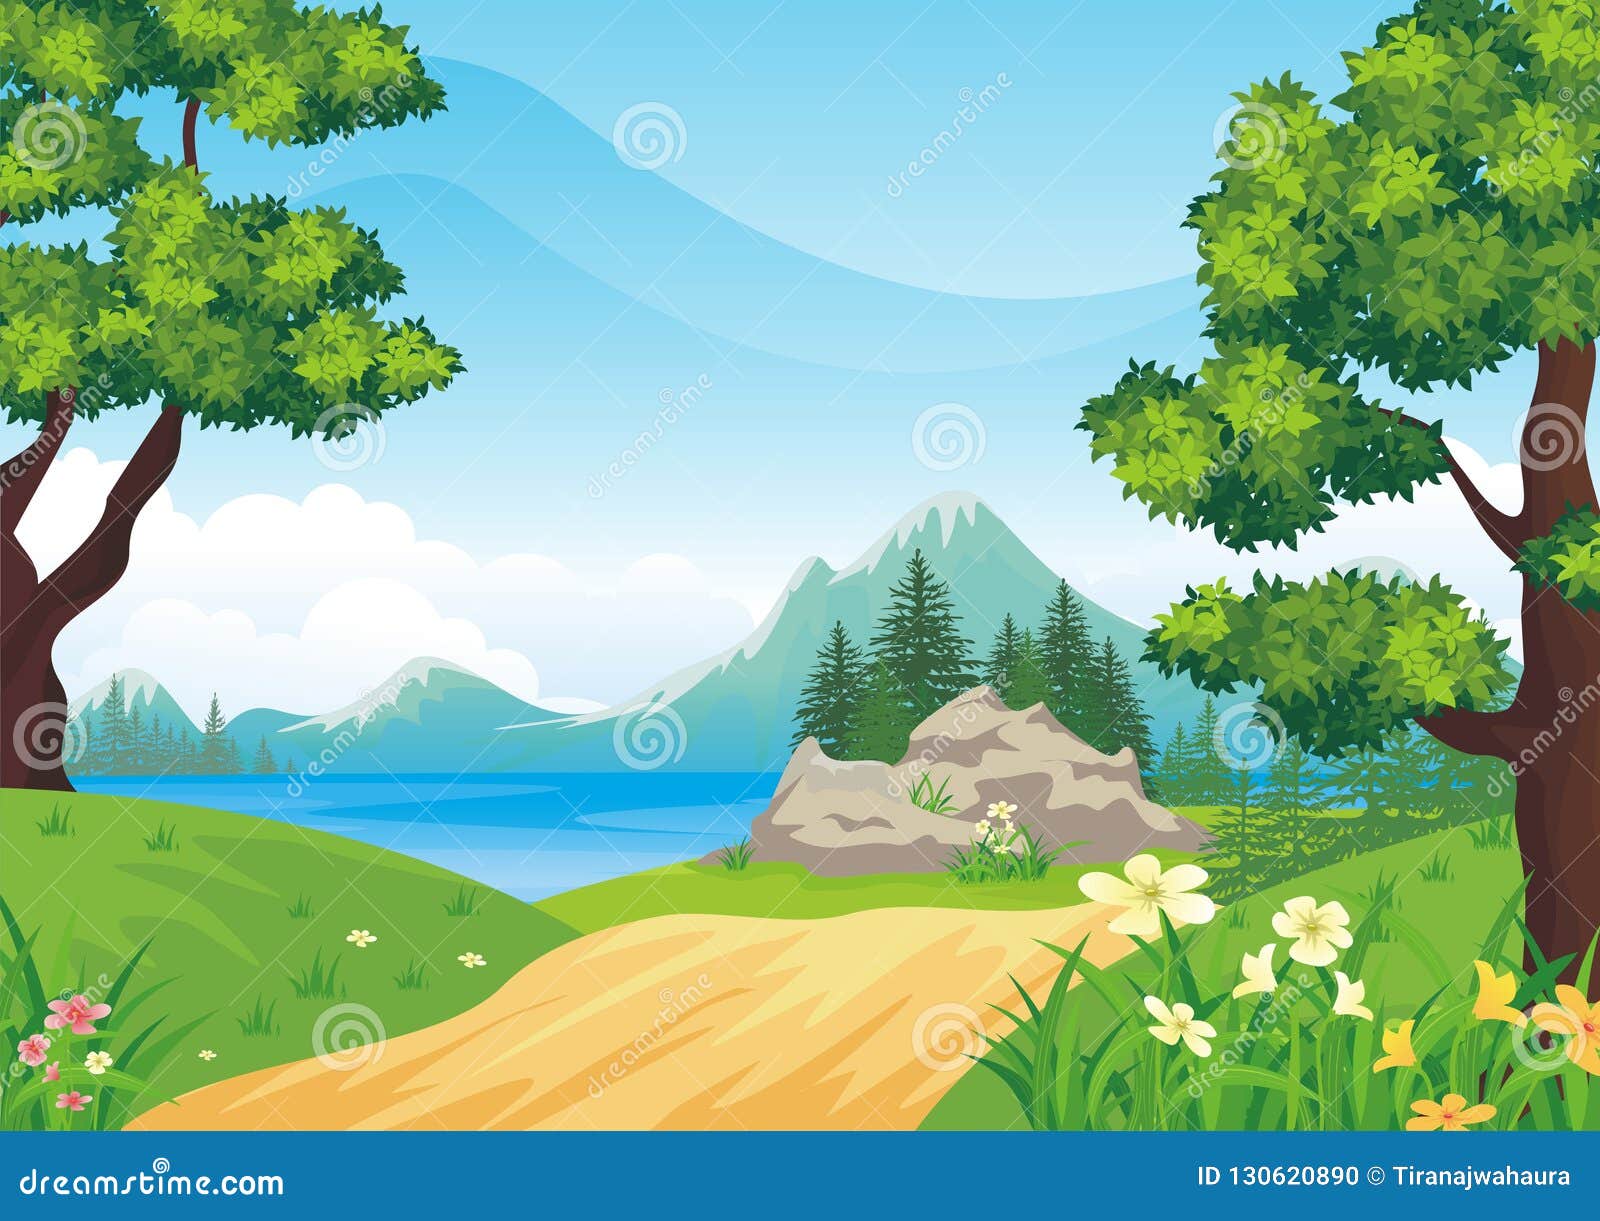 Landscape with Rocky Hill, Lovely and Cute Scenery Cartoon Design. Stock  Vector - Illustration of design, agriculture: 130620890